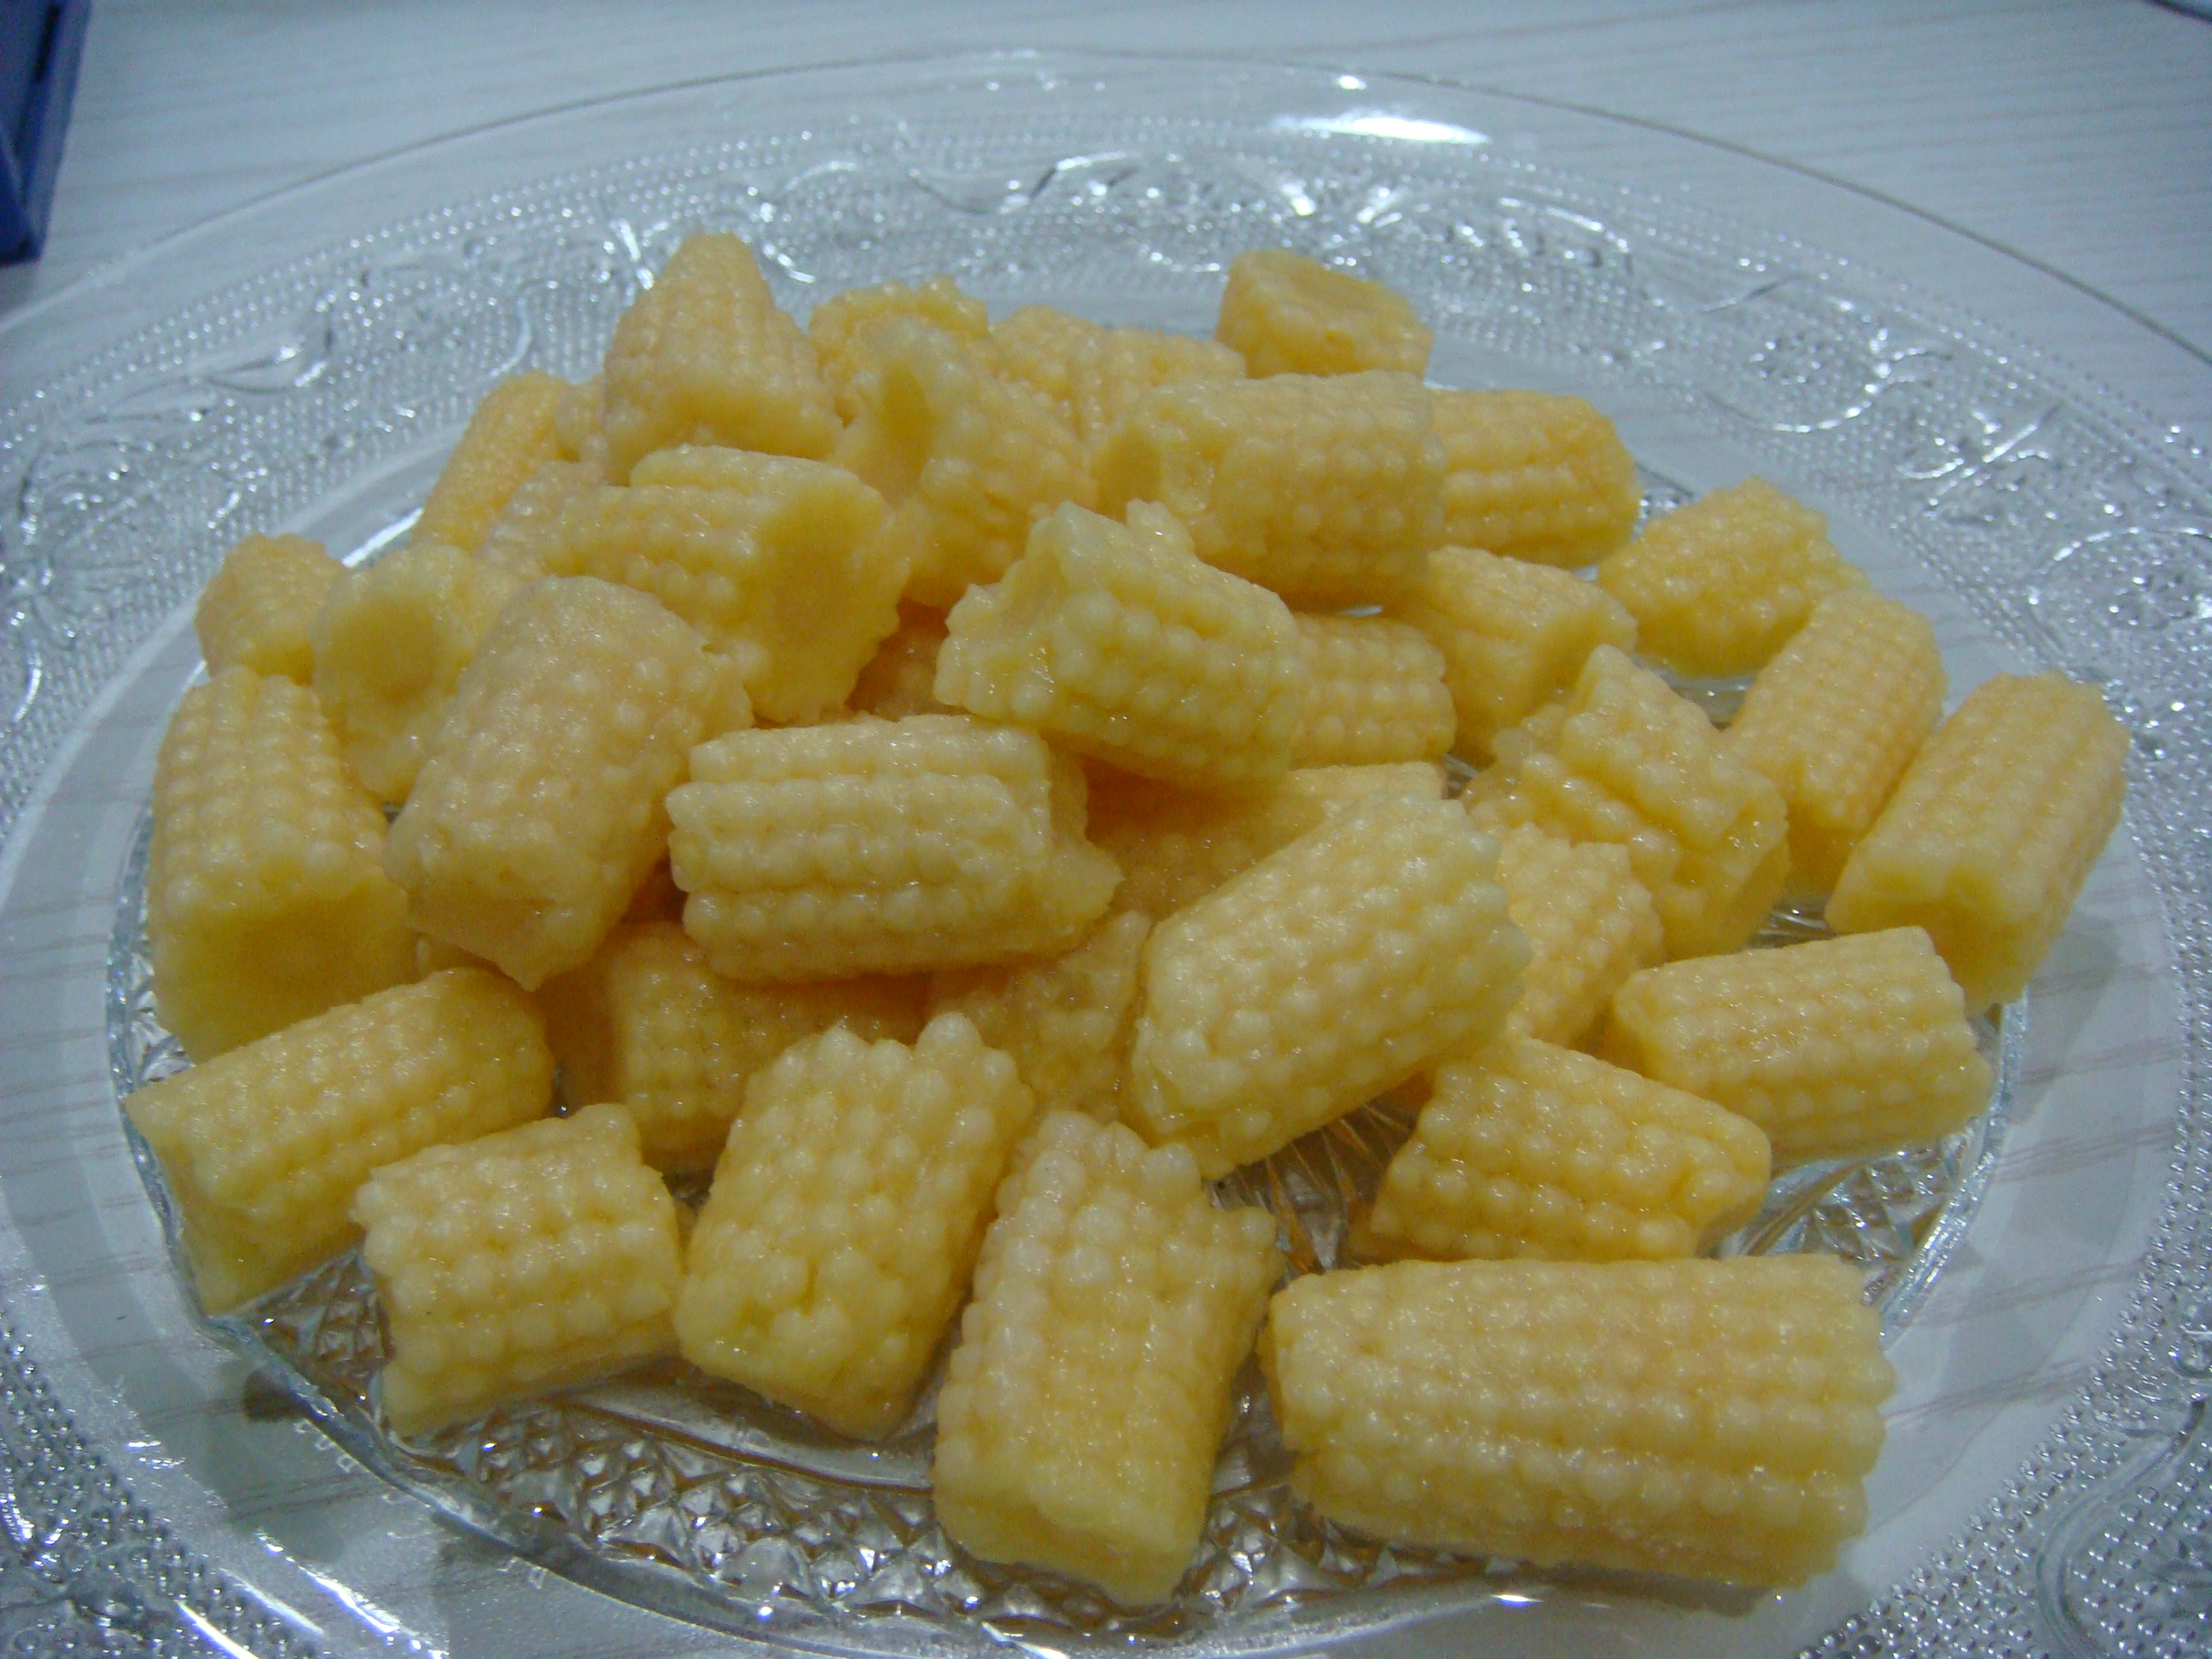 Canned Baby Corn In Brine